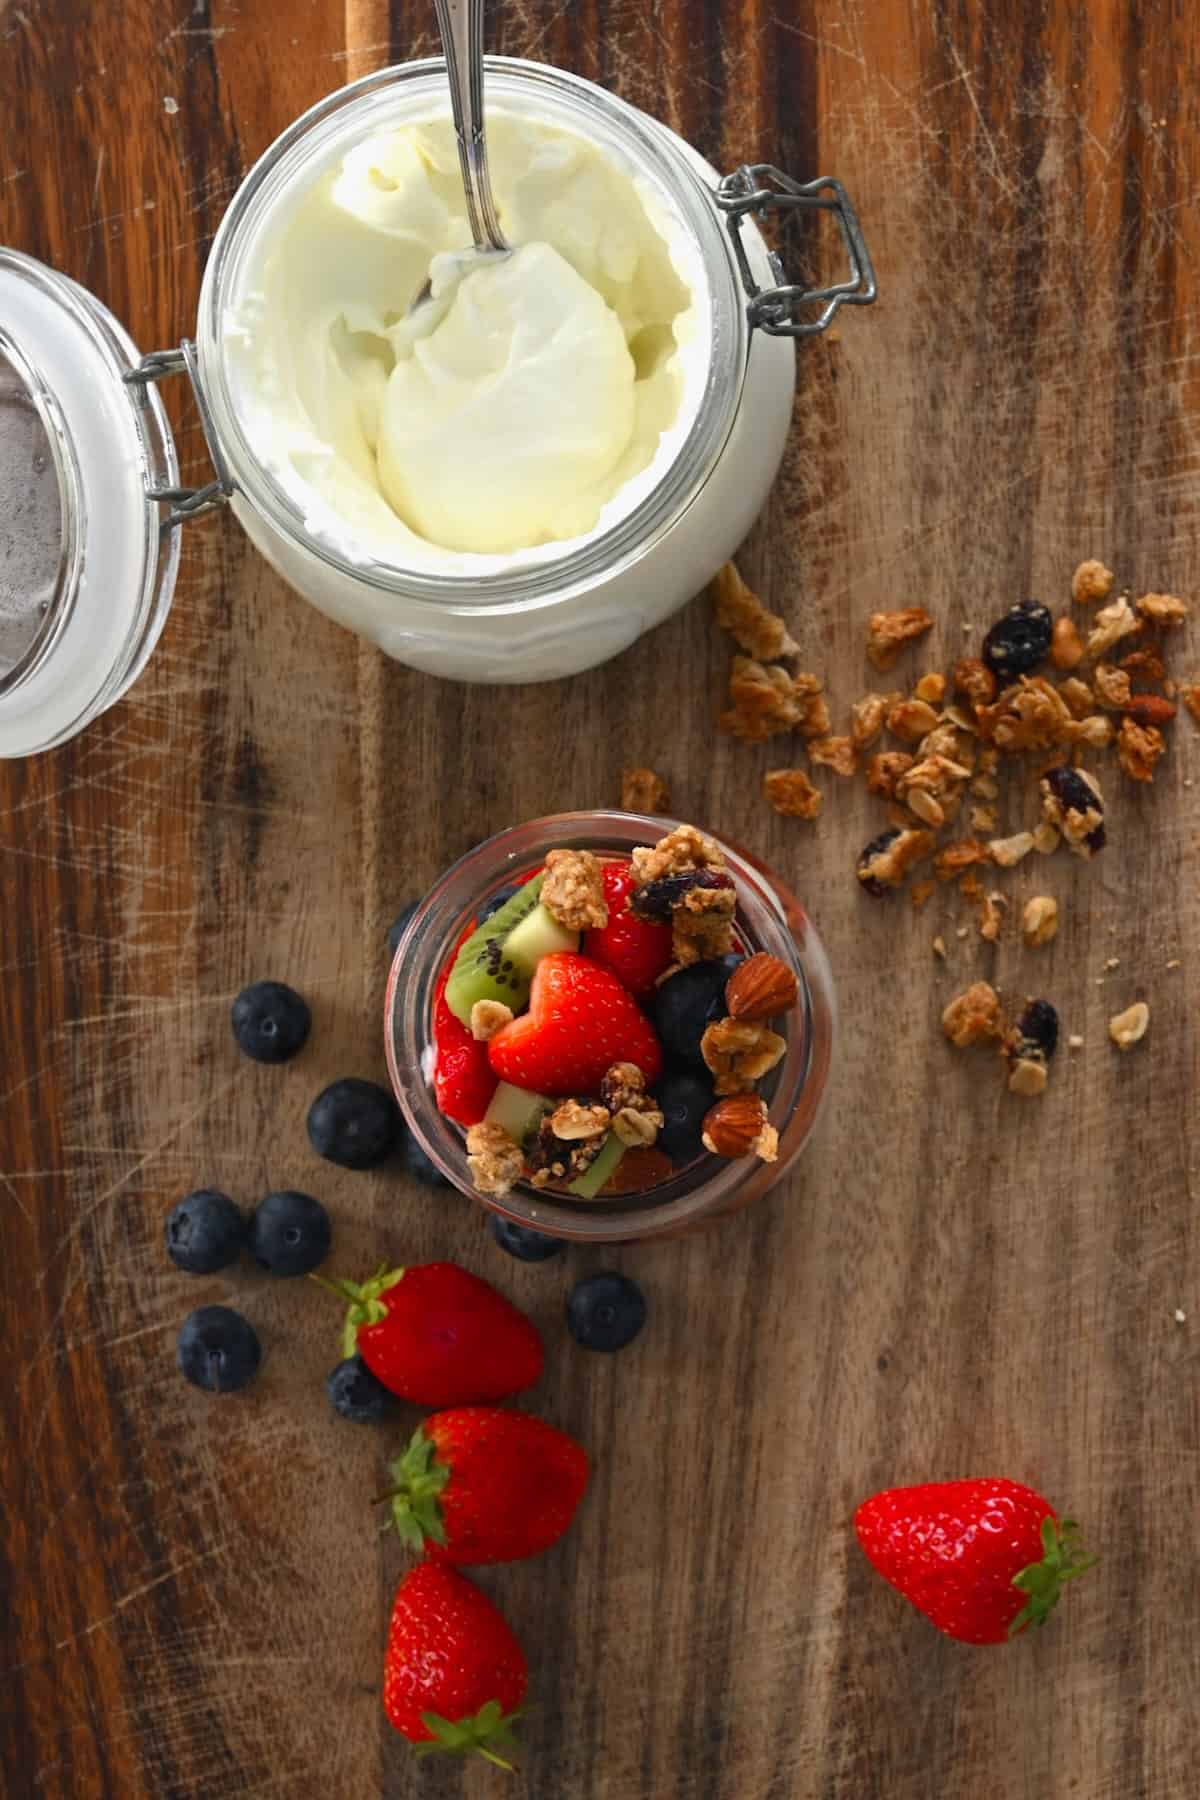 Yogurt parfait placed next to a bowl with yogurt and scattered berries